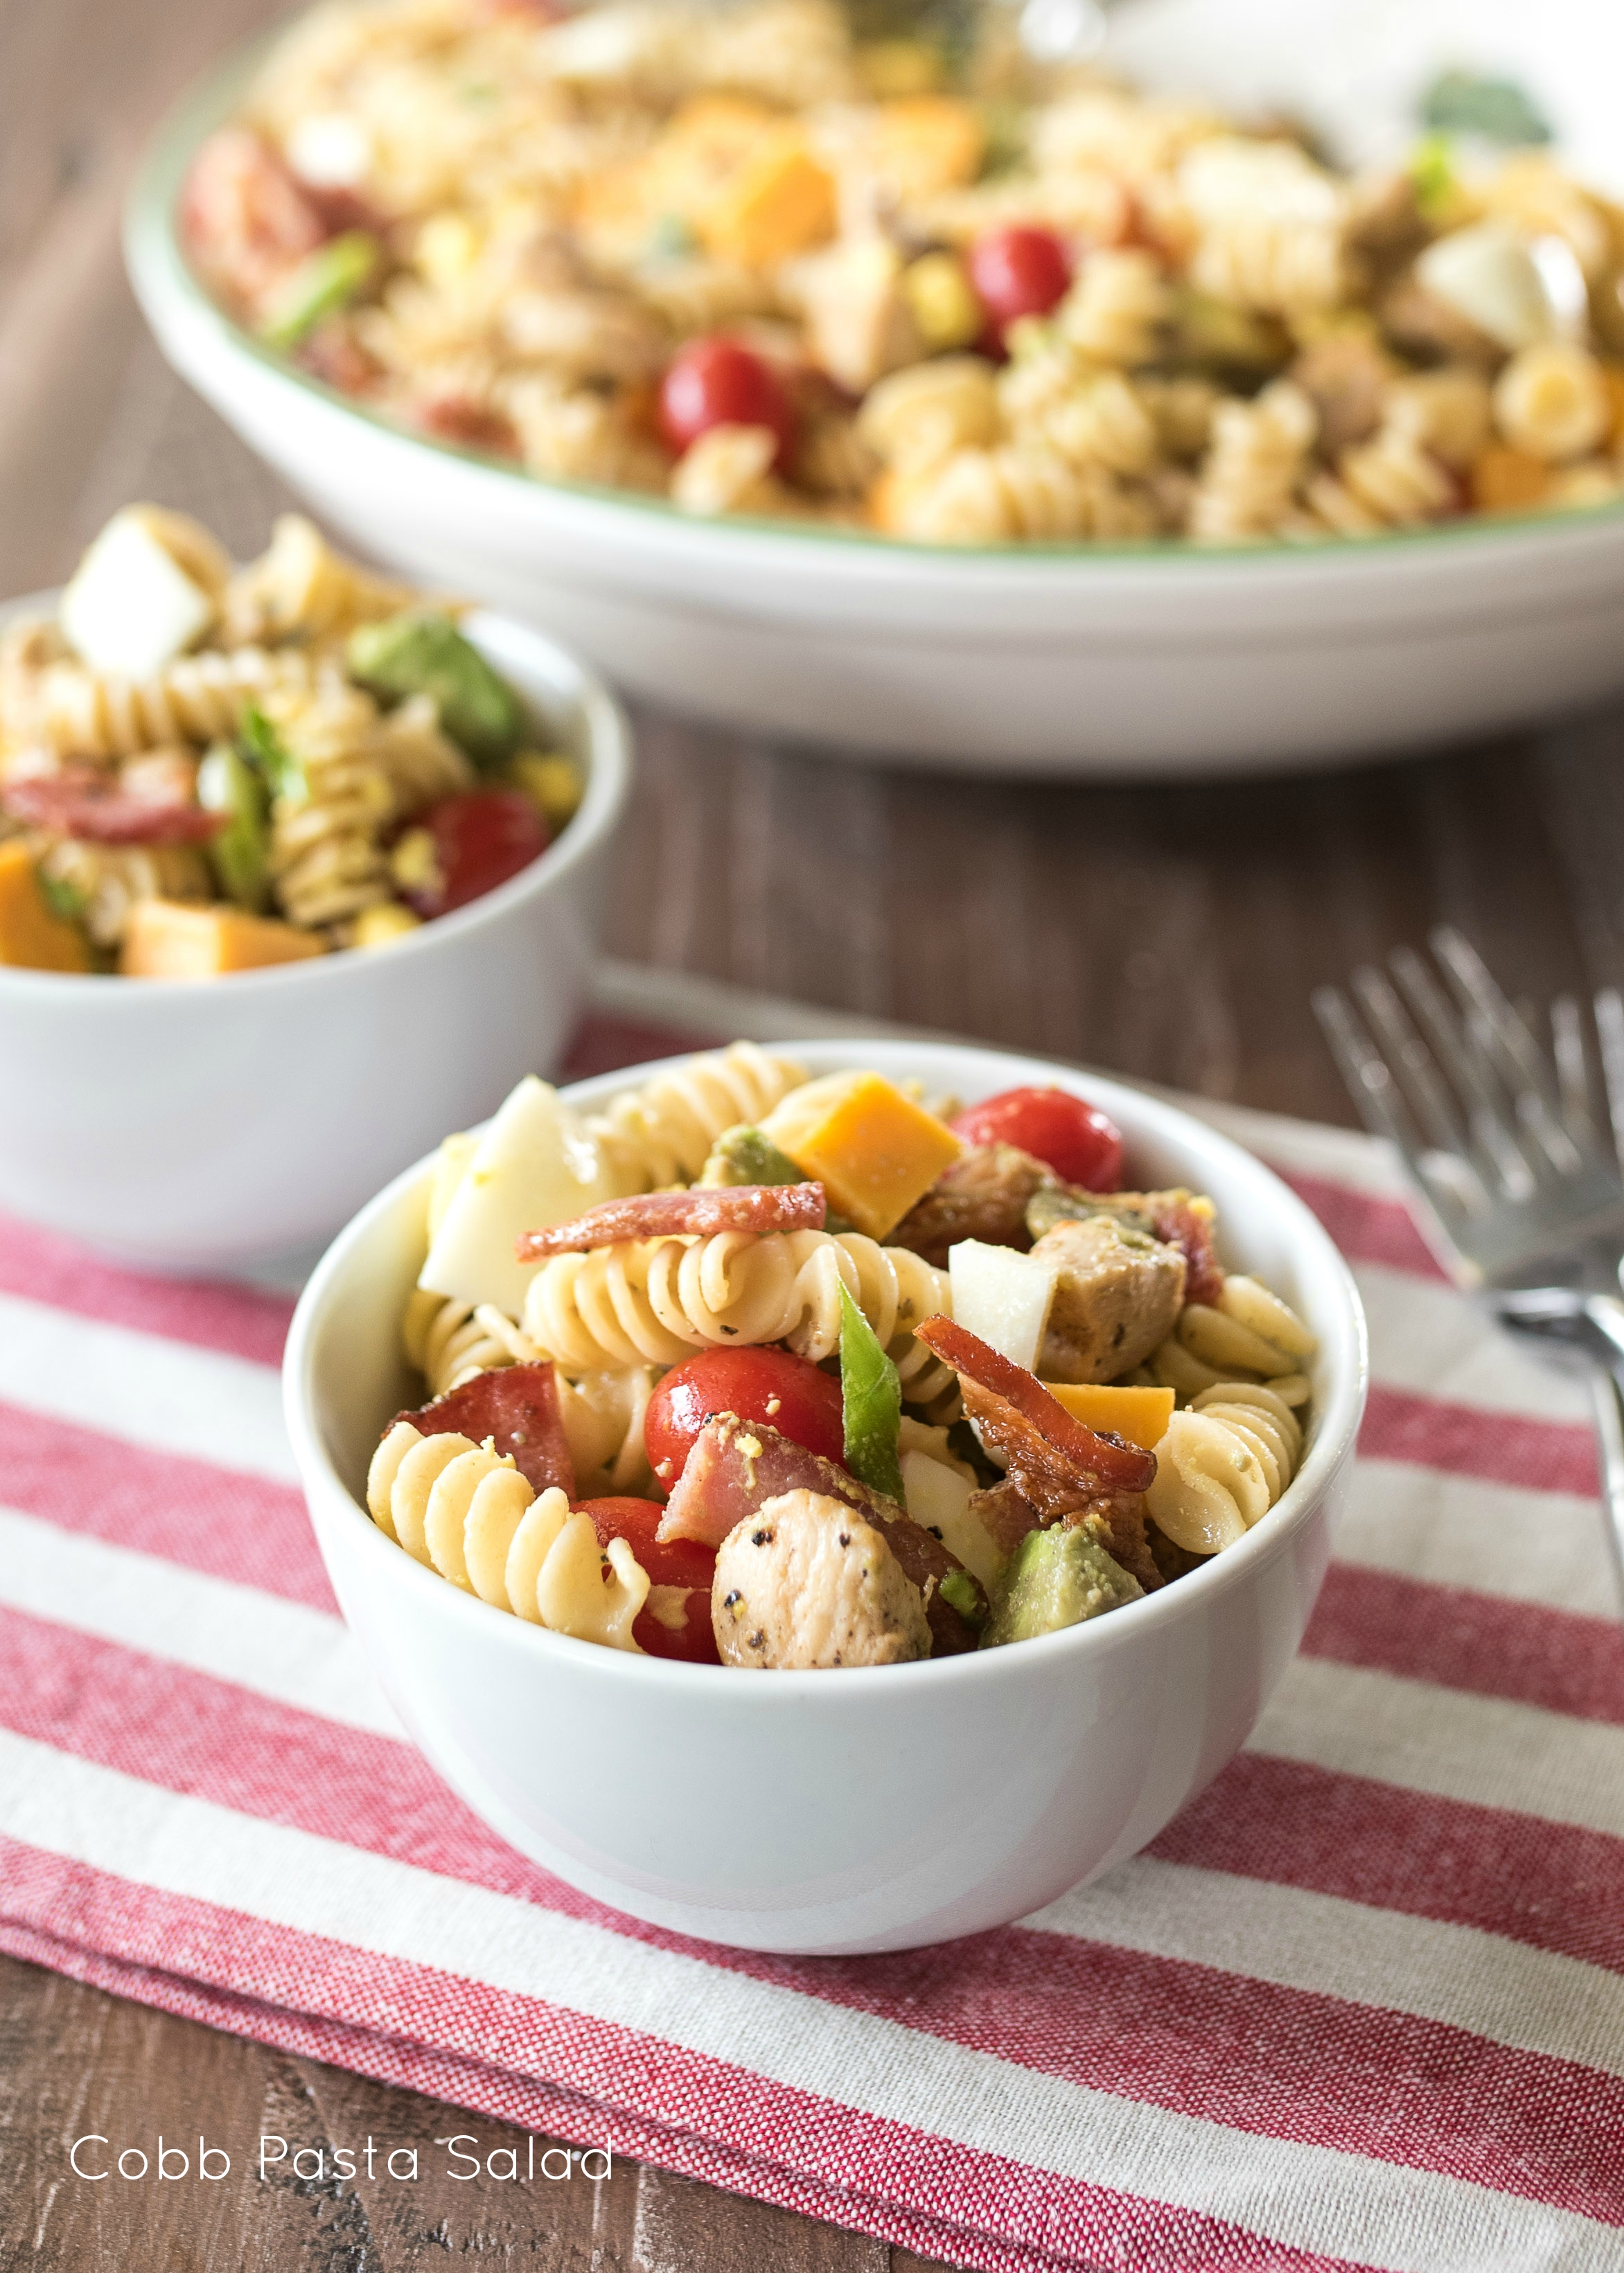 Cobb Pasta Salad- traditional Cobb Salad meets pasta for this kid-friendly, one-dish meal.